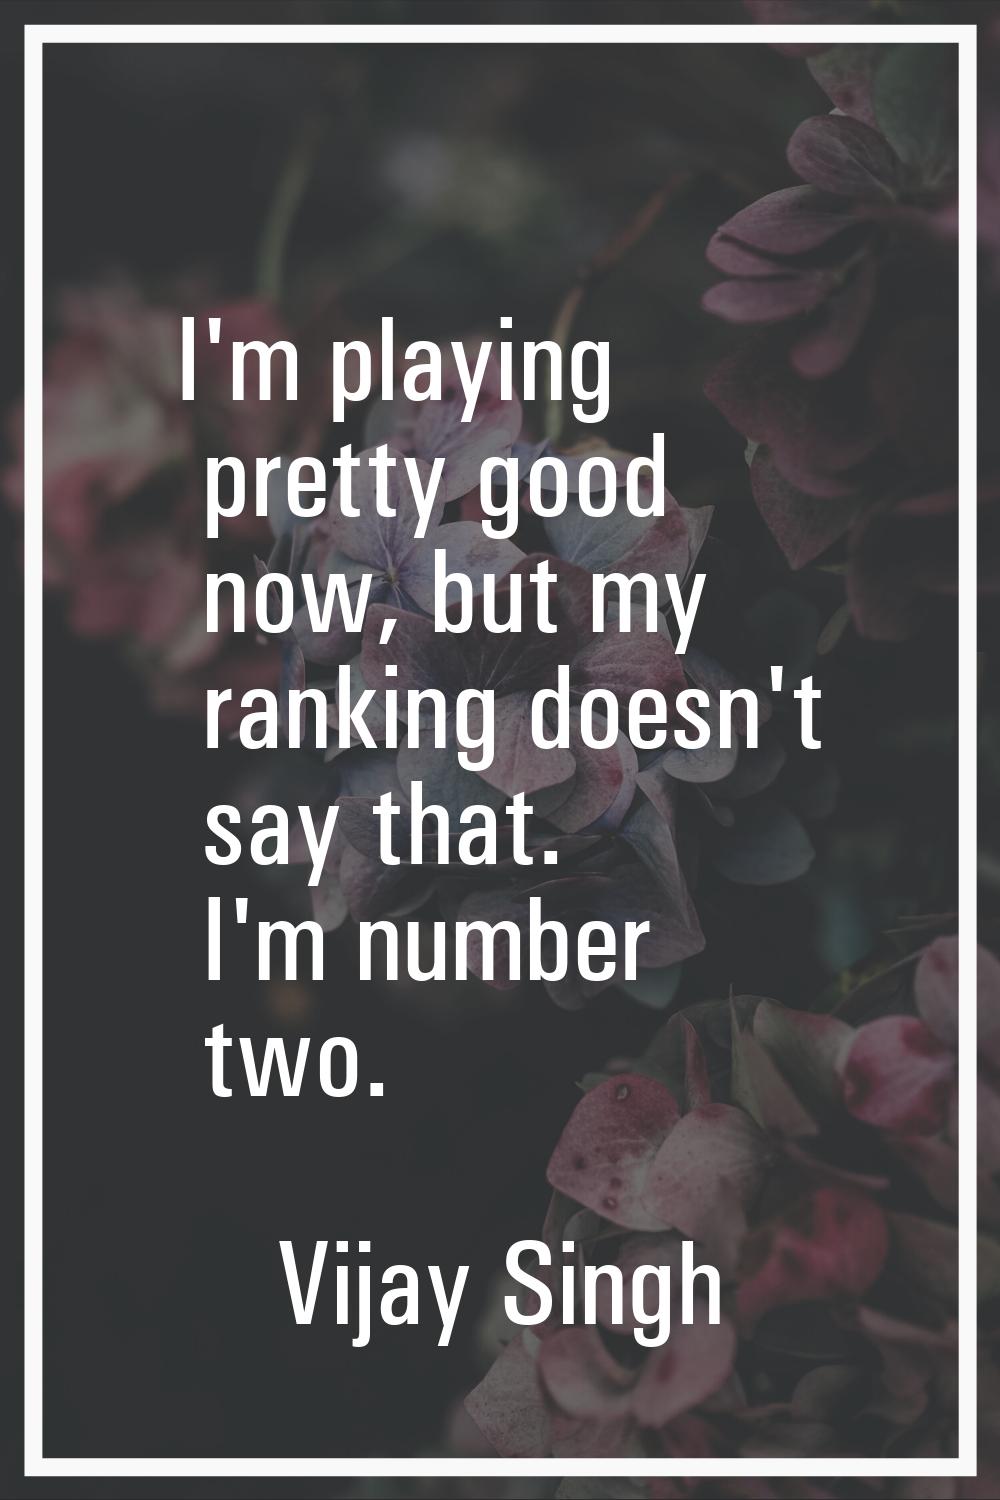 I'm playing pretty good now, but my ranking doesn't say that. I'm number two.